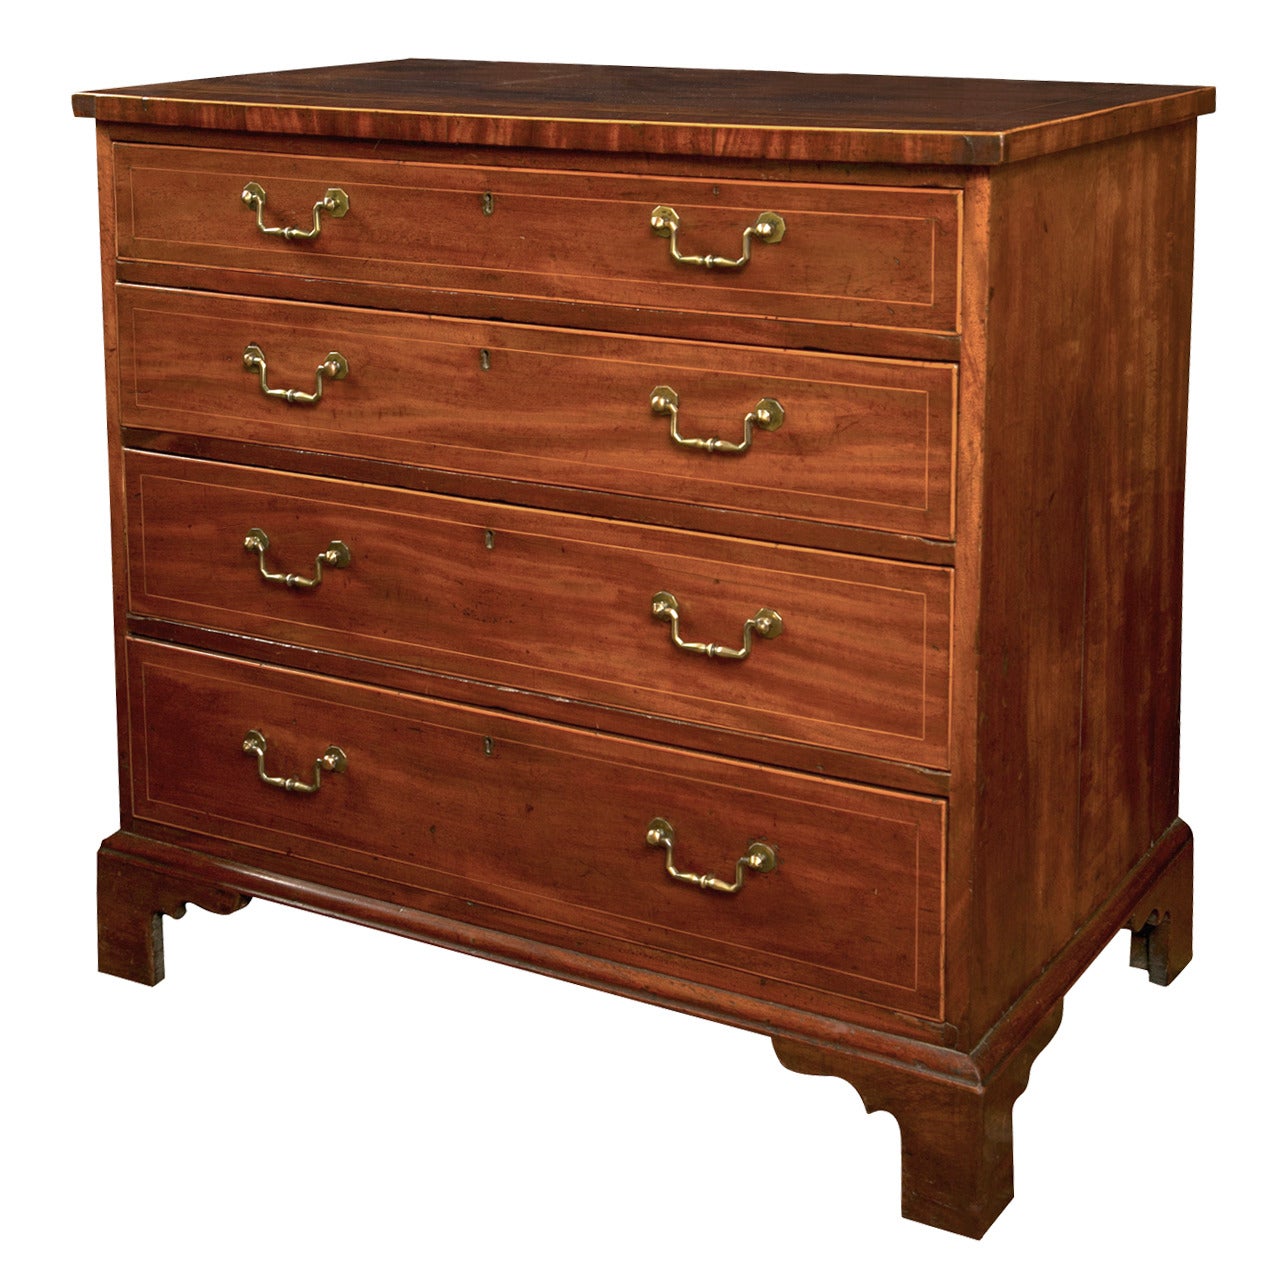 Mahogany Bachelor's Chest of Drawers with Banding